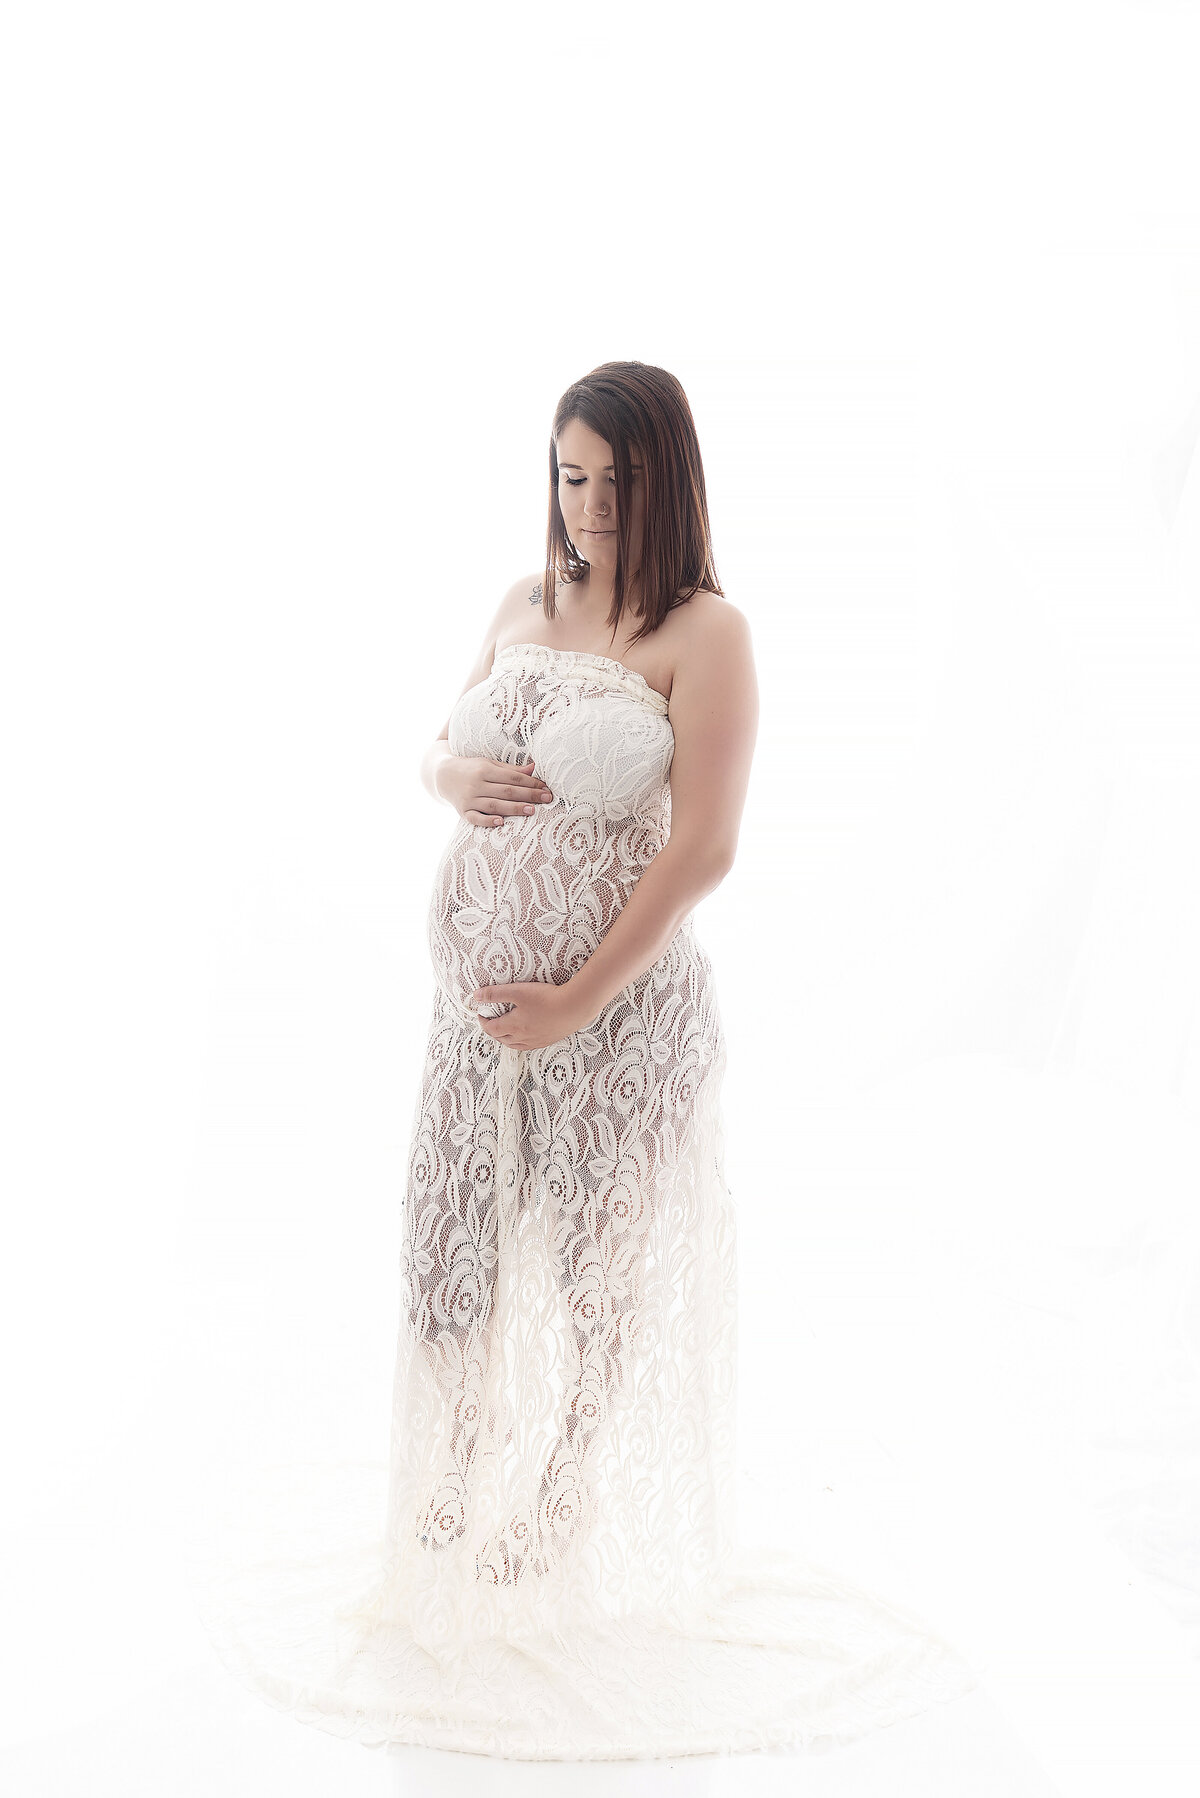 A mother to be wearing a lace see through maternity coverup stands in a studio holding her bump